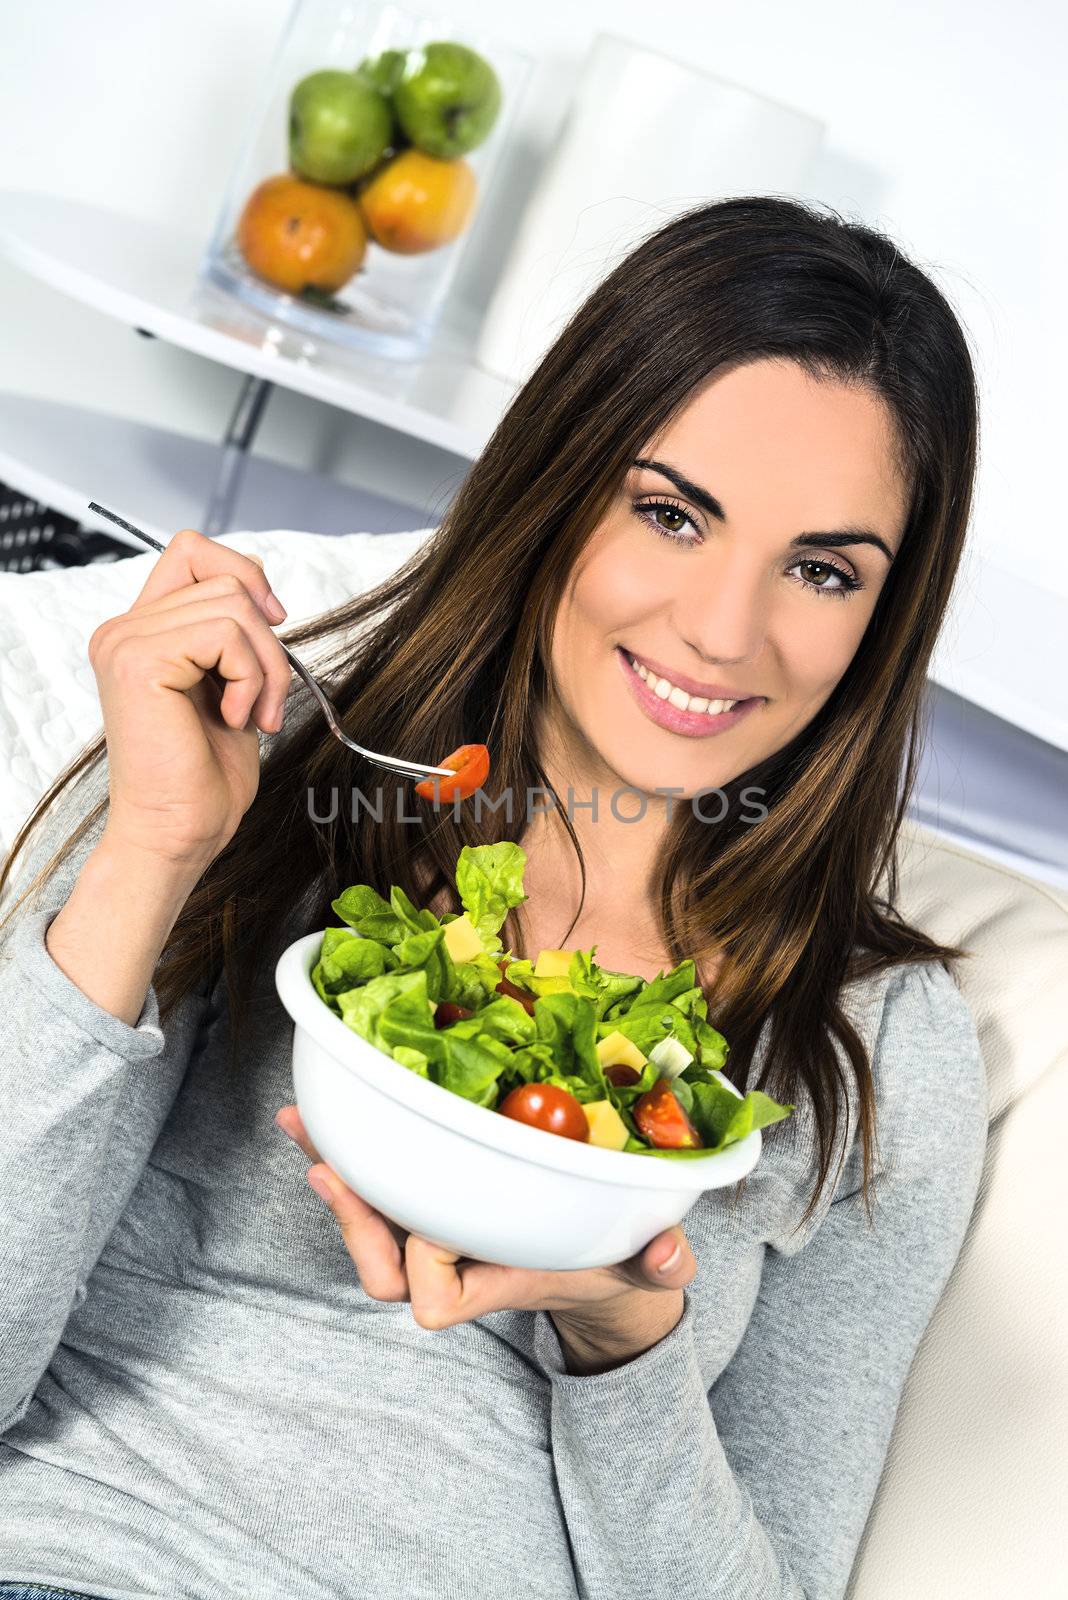 Woman eating salad. Beautiful healthy smiling Caucasian woman enjoying a fresh healthy salad sitting in sofa looking up. High angle view with copy space on modern interior. 